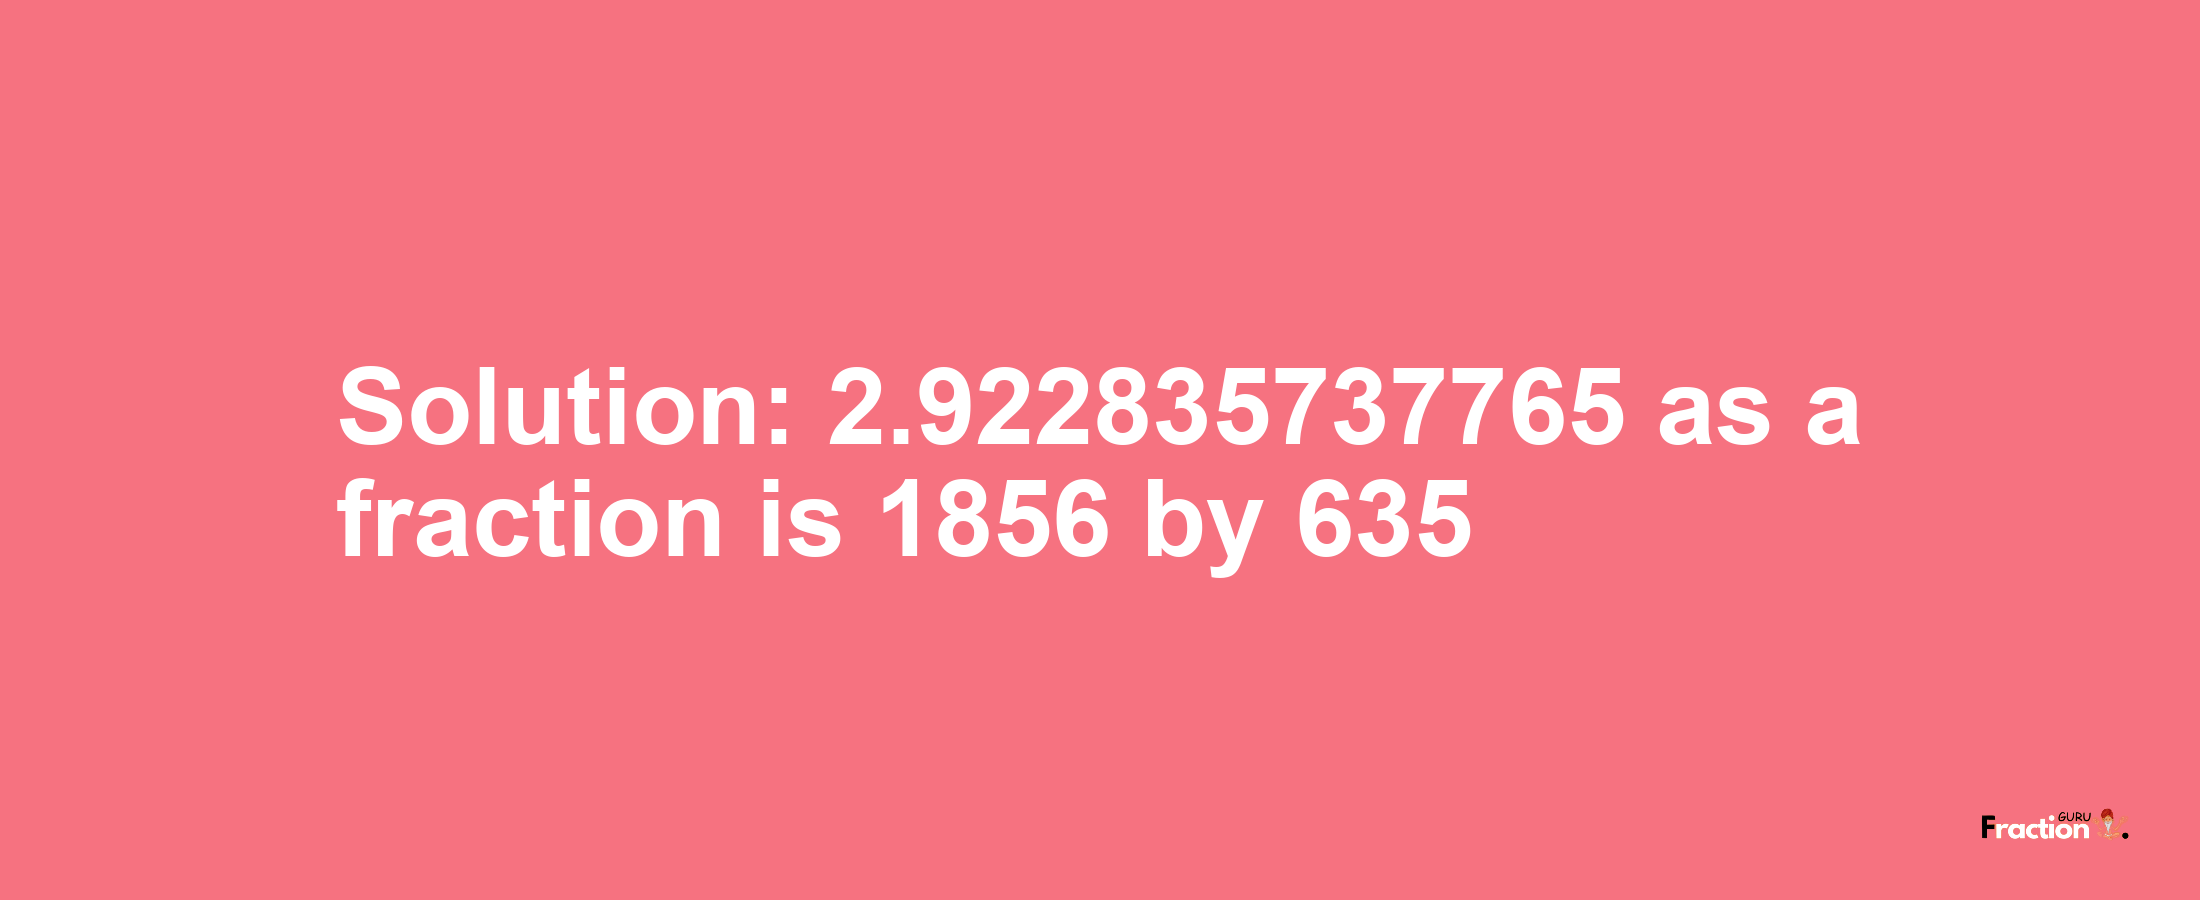 Solution:2.922835737765 as a fraction is 1856/635